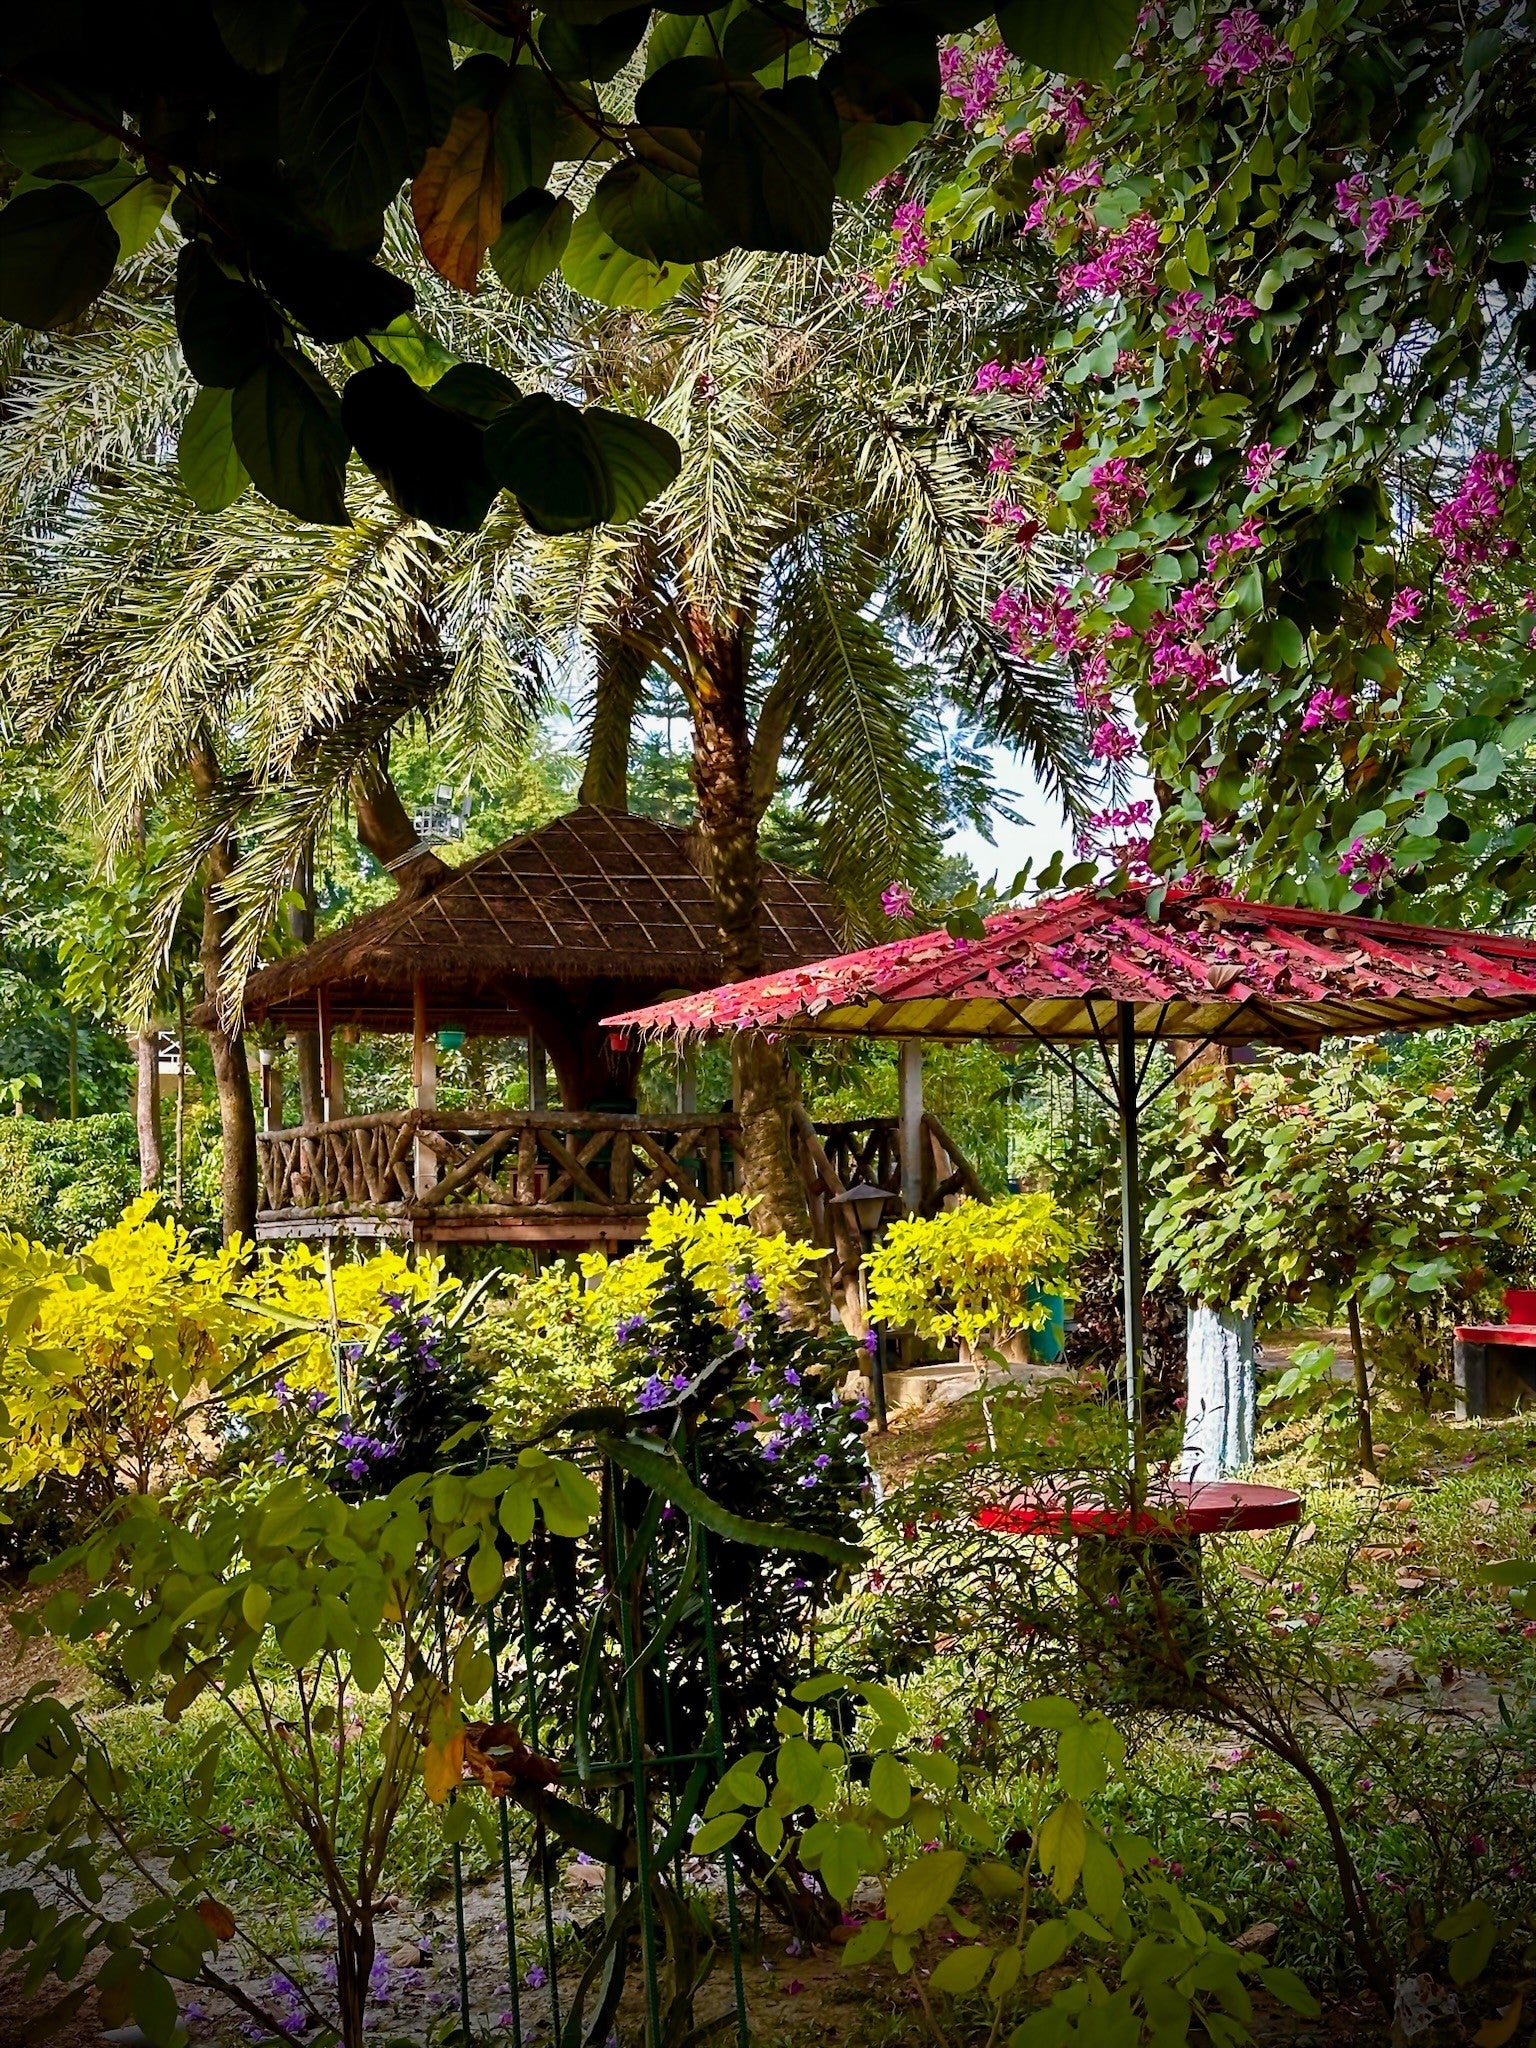 Quaint gazebo surrounded by vibrant flowers at Barnochata, a picturesque resort and Dhaka hotel located in Savar, offering a peaceful getaway.